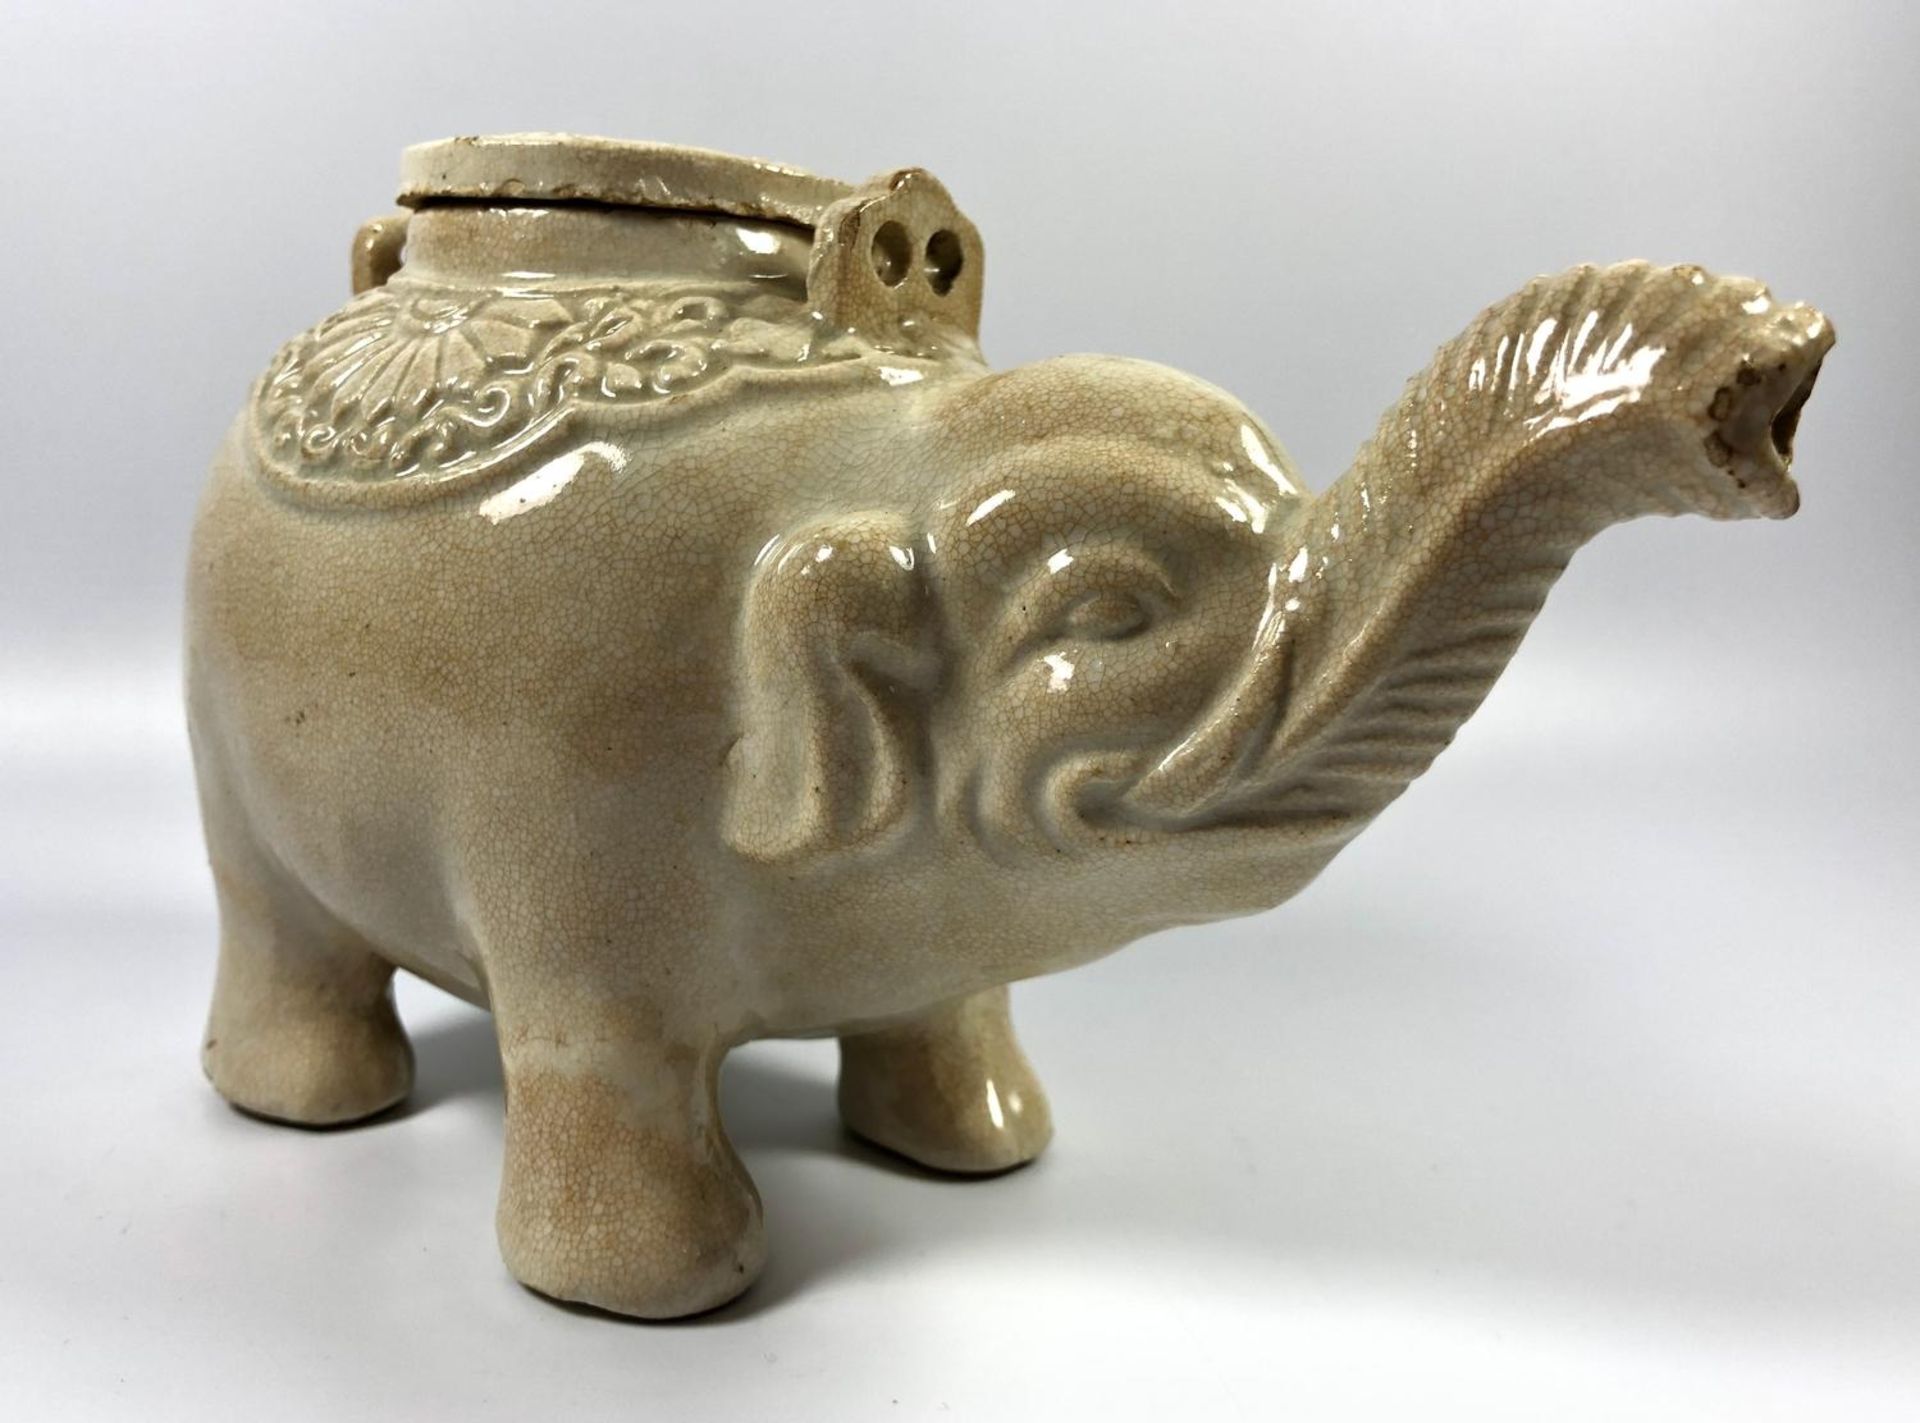 A BLANC DE CHINE STYLE CHINESE CERAMIC ELEPHANT LIDDED POT, HEIGHT 11CM